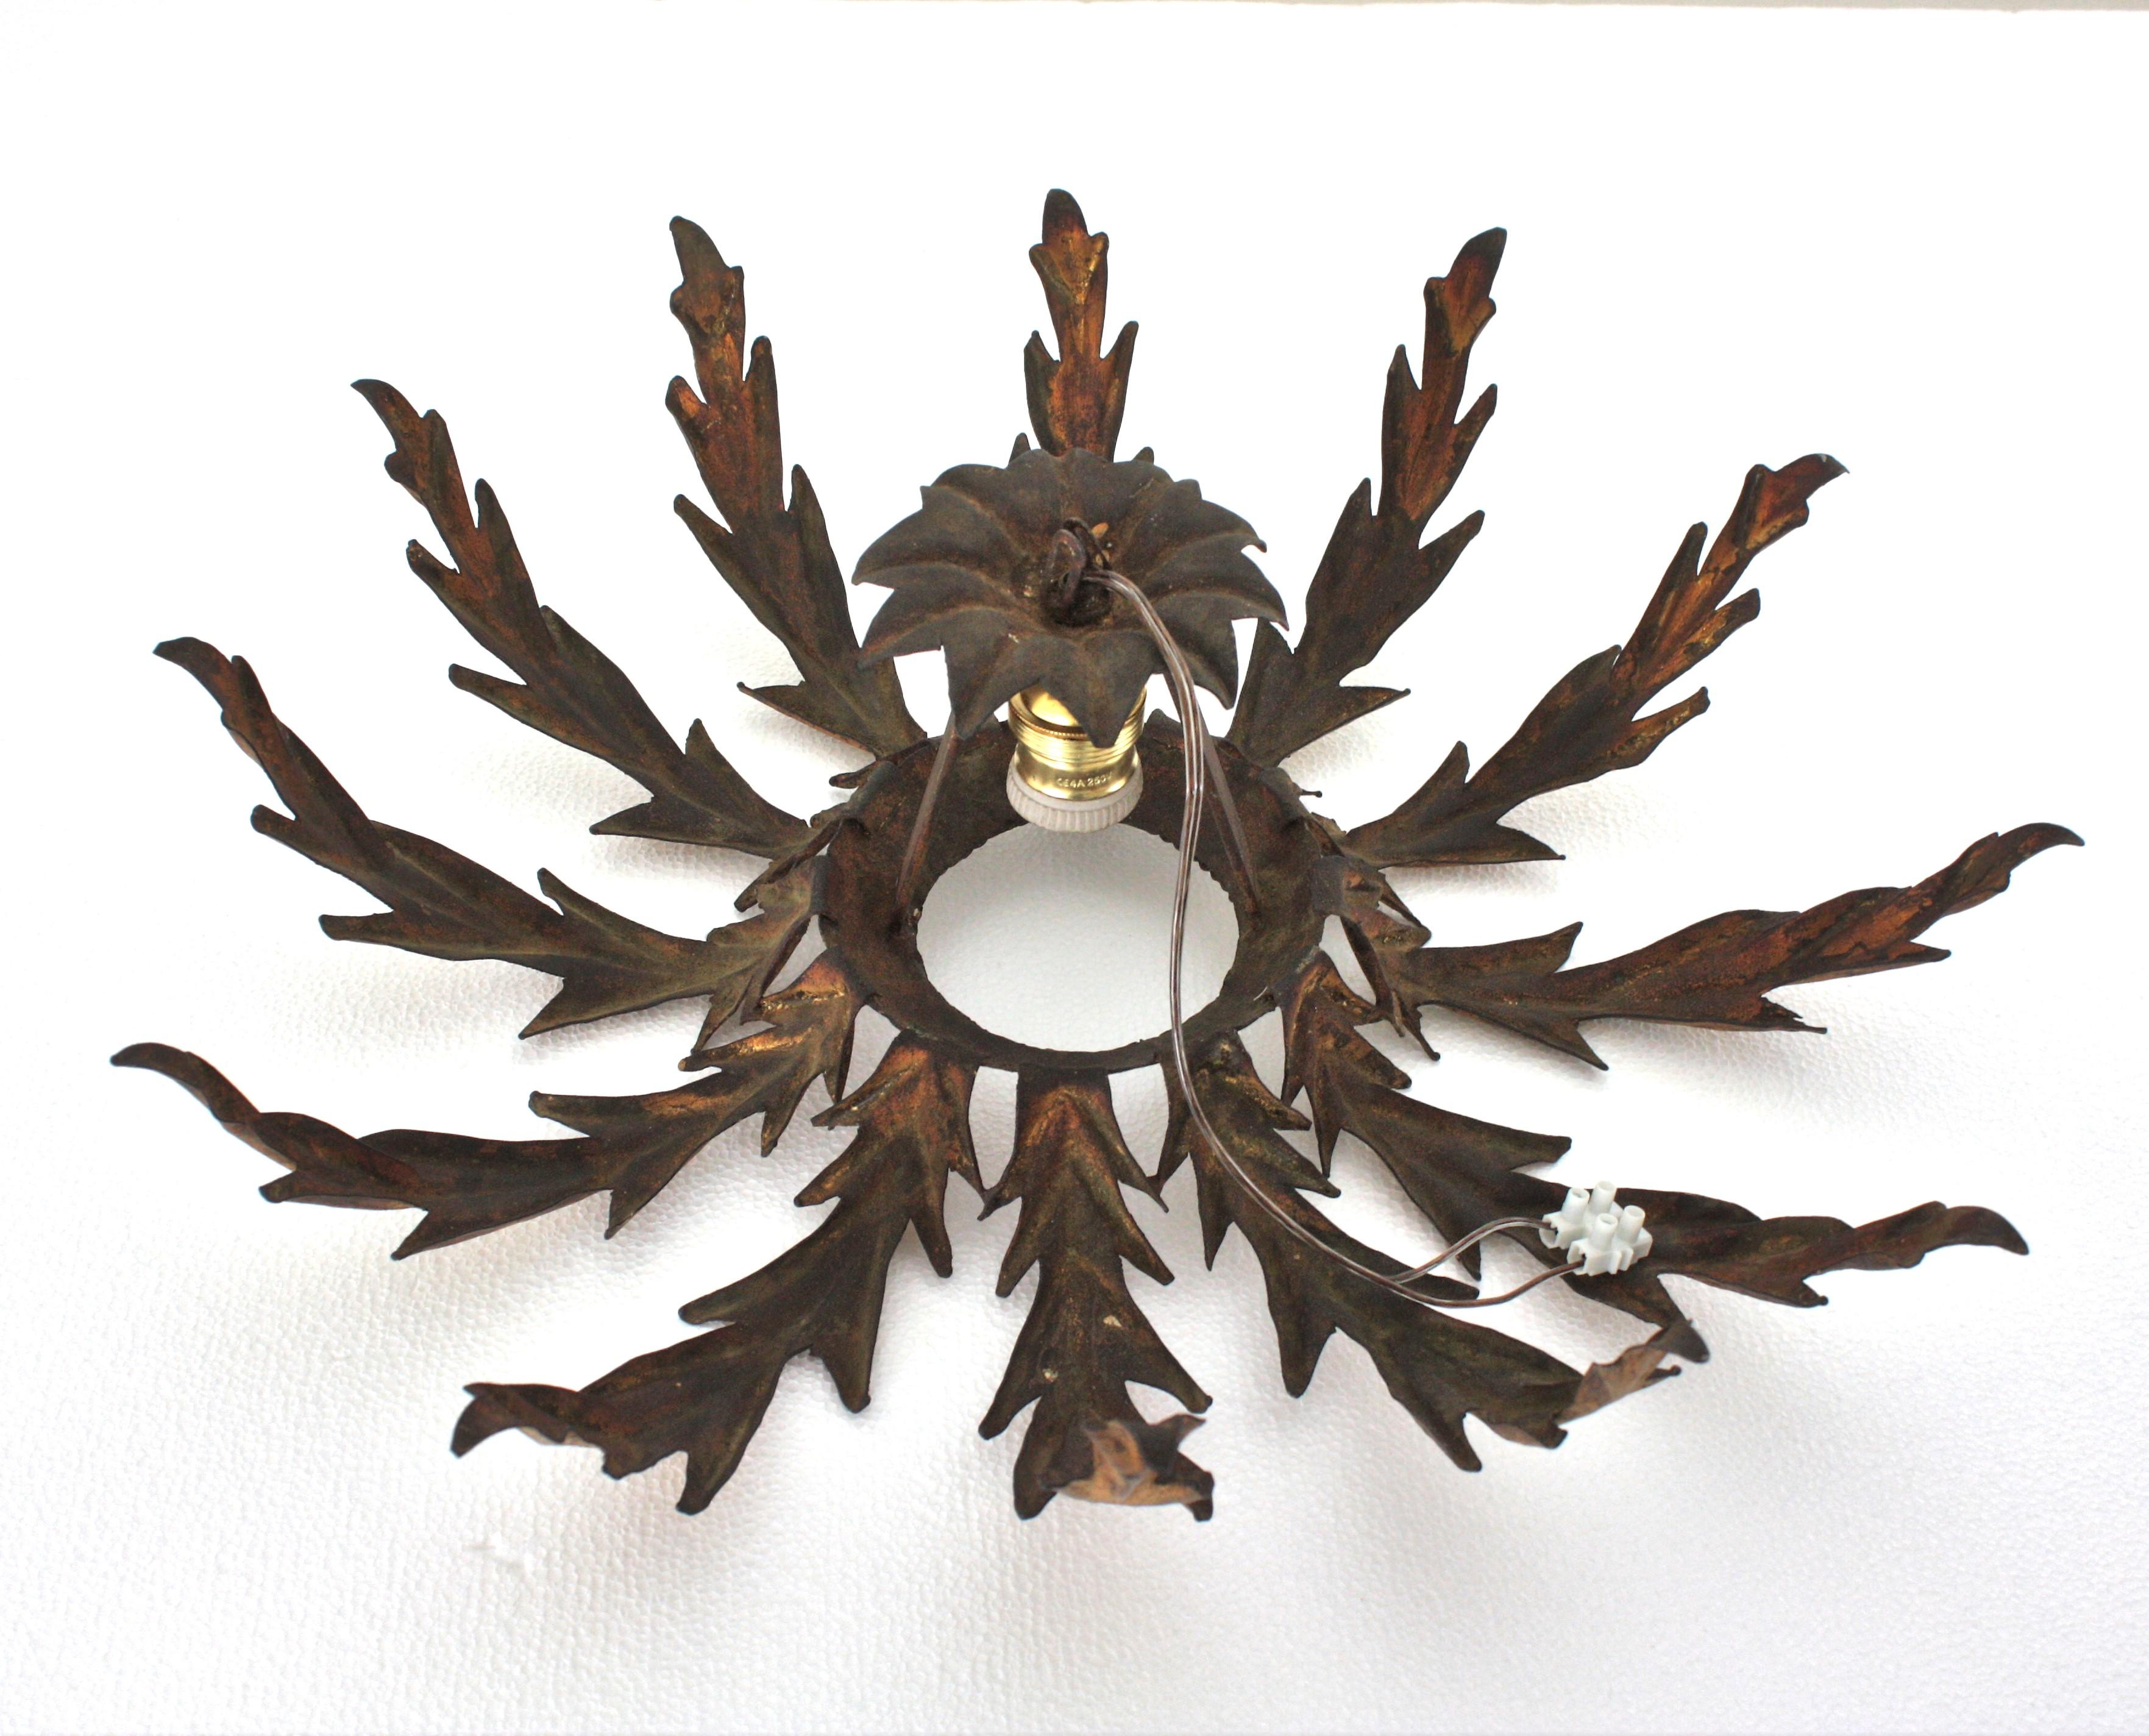 French Sunburst Leafed Ceiling Light Fixture in Gilt Iron, 1940s For Sale 9